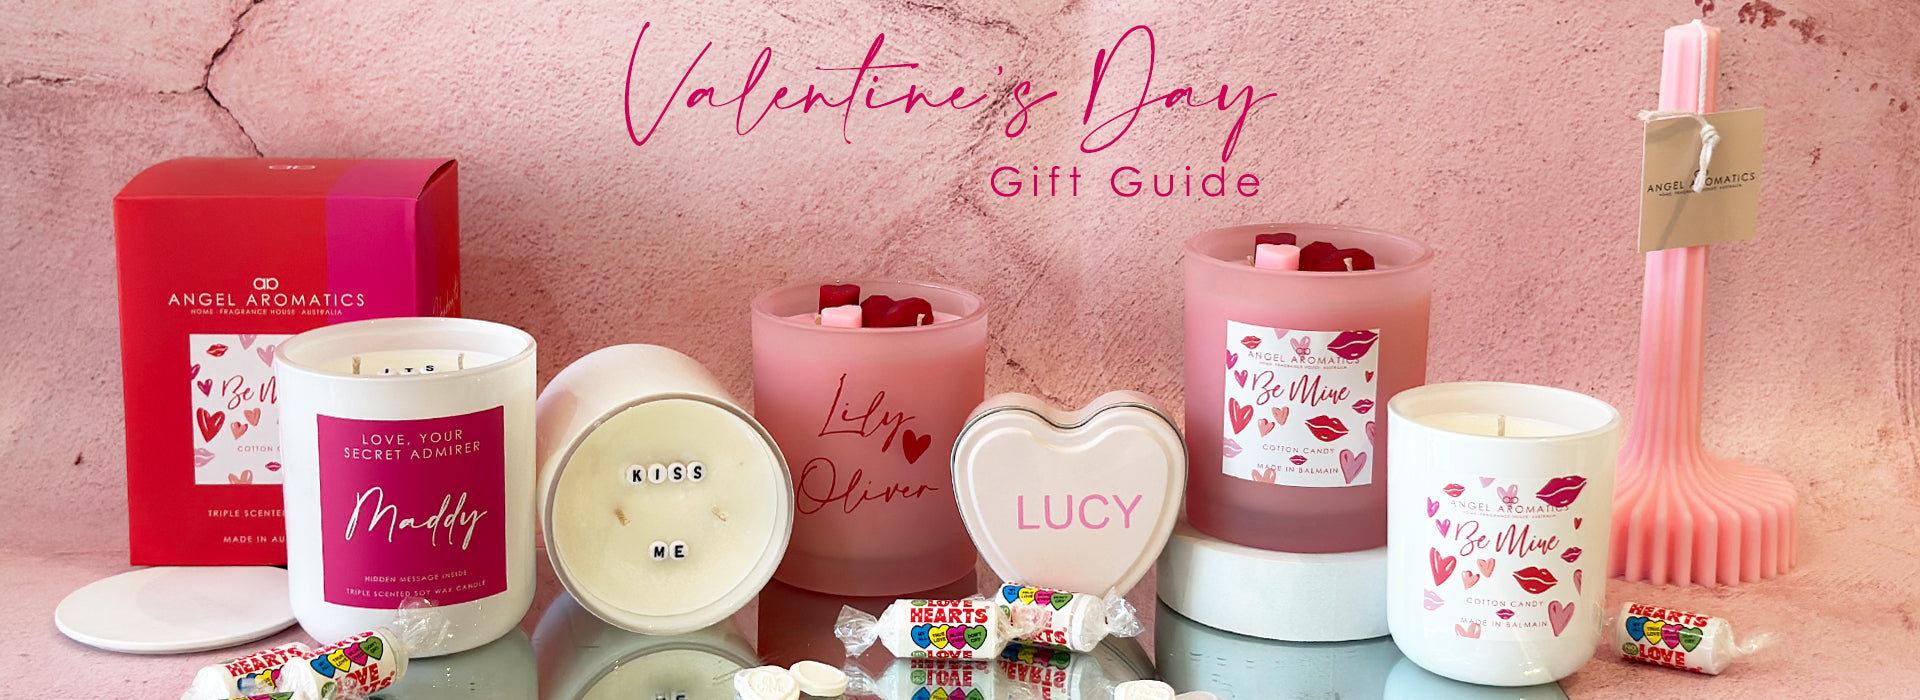 personalised-valentines-gifts